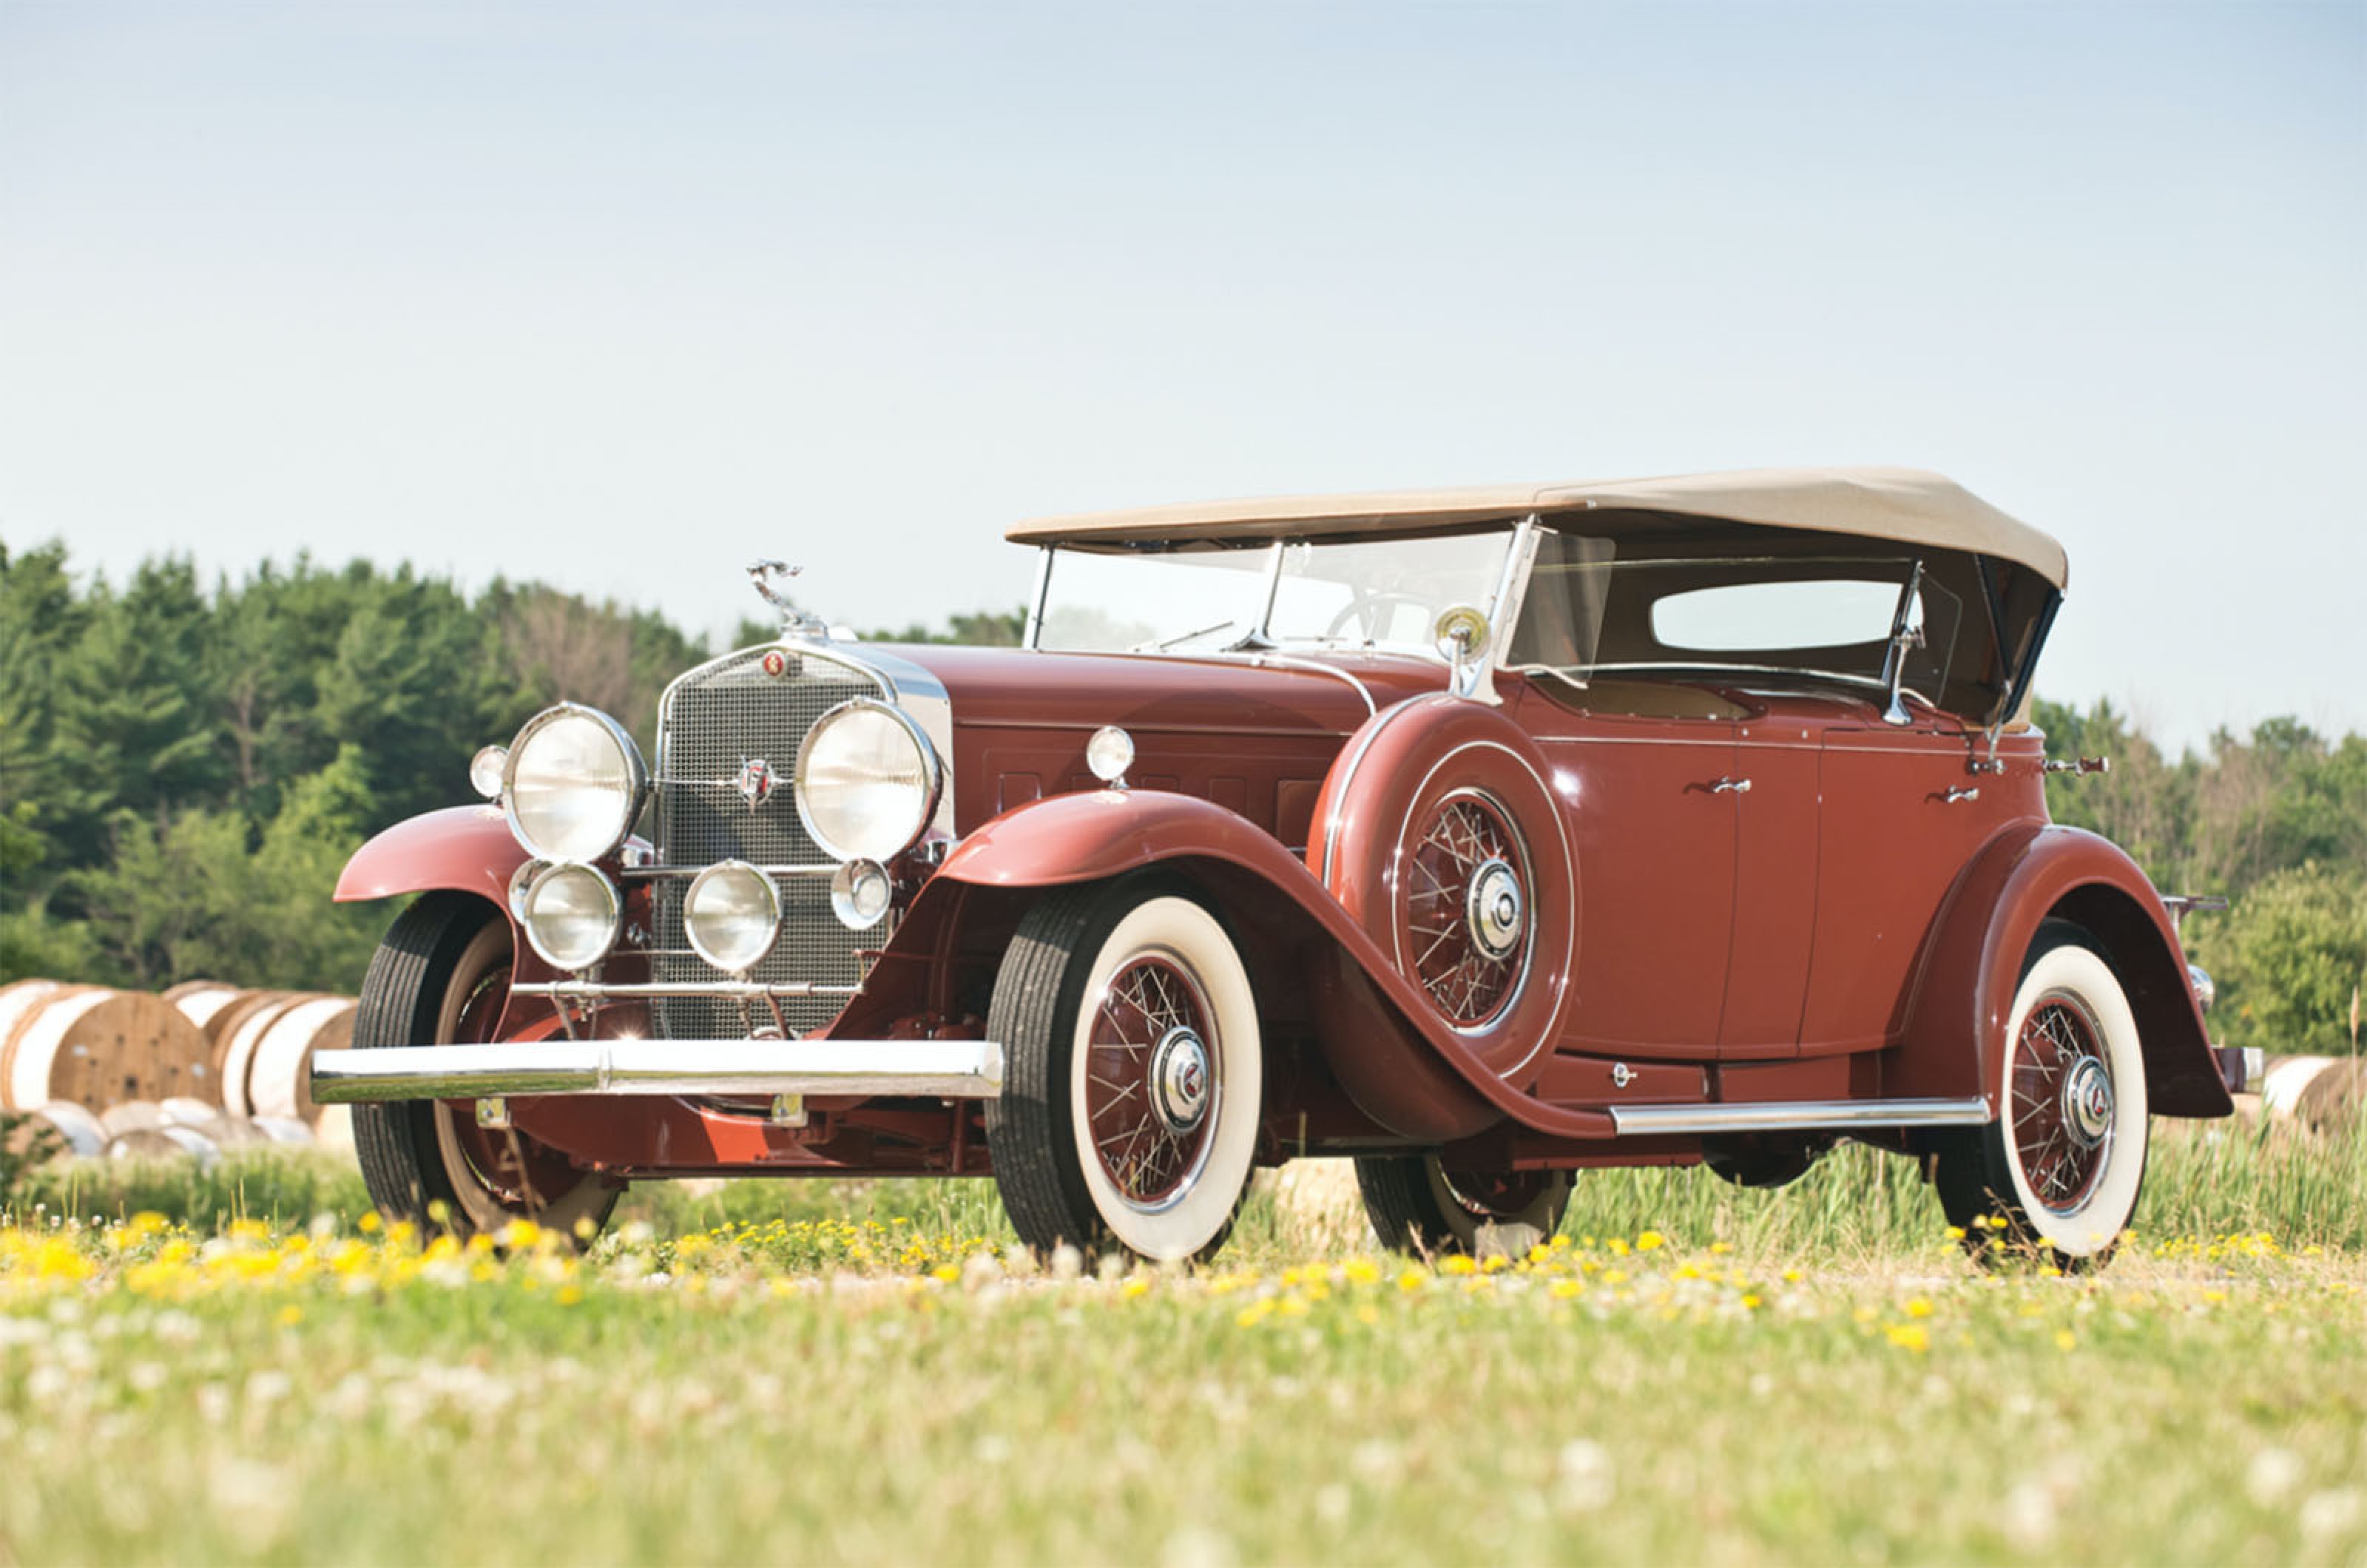 <p>Keen to steal a march over arch-rival Packard, with its V12-engined range-topper, Cadillac launched its Series 452-A V16 flagship model to up the ante.</p>  <p>With its Owen Nacker-designed engine comprising two straight-eight Buick units sharing a common crankshaft, the 452’s name derived from its overall cubic-inch displacement (equal to 7.4 litres).</p>  <p>The V16 engine bestowed the 452 with exceptional refinement, yet was still capable of powering the car to more than 100mph.</p>  <p>GM’s legendary designer, Harley Earl, was responsible for the 452’s styling, which helped position Cadillac in the bespoke-luxury market.</p>